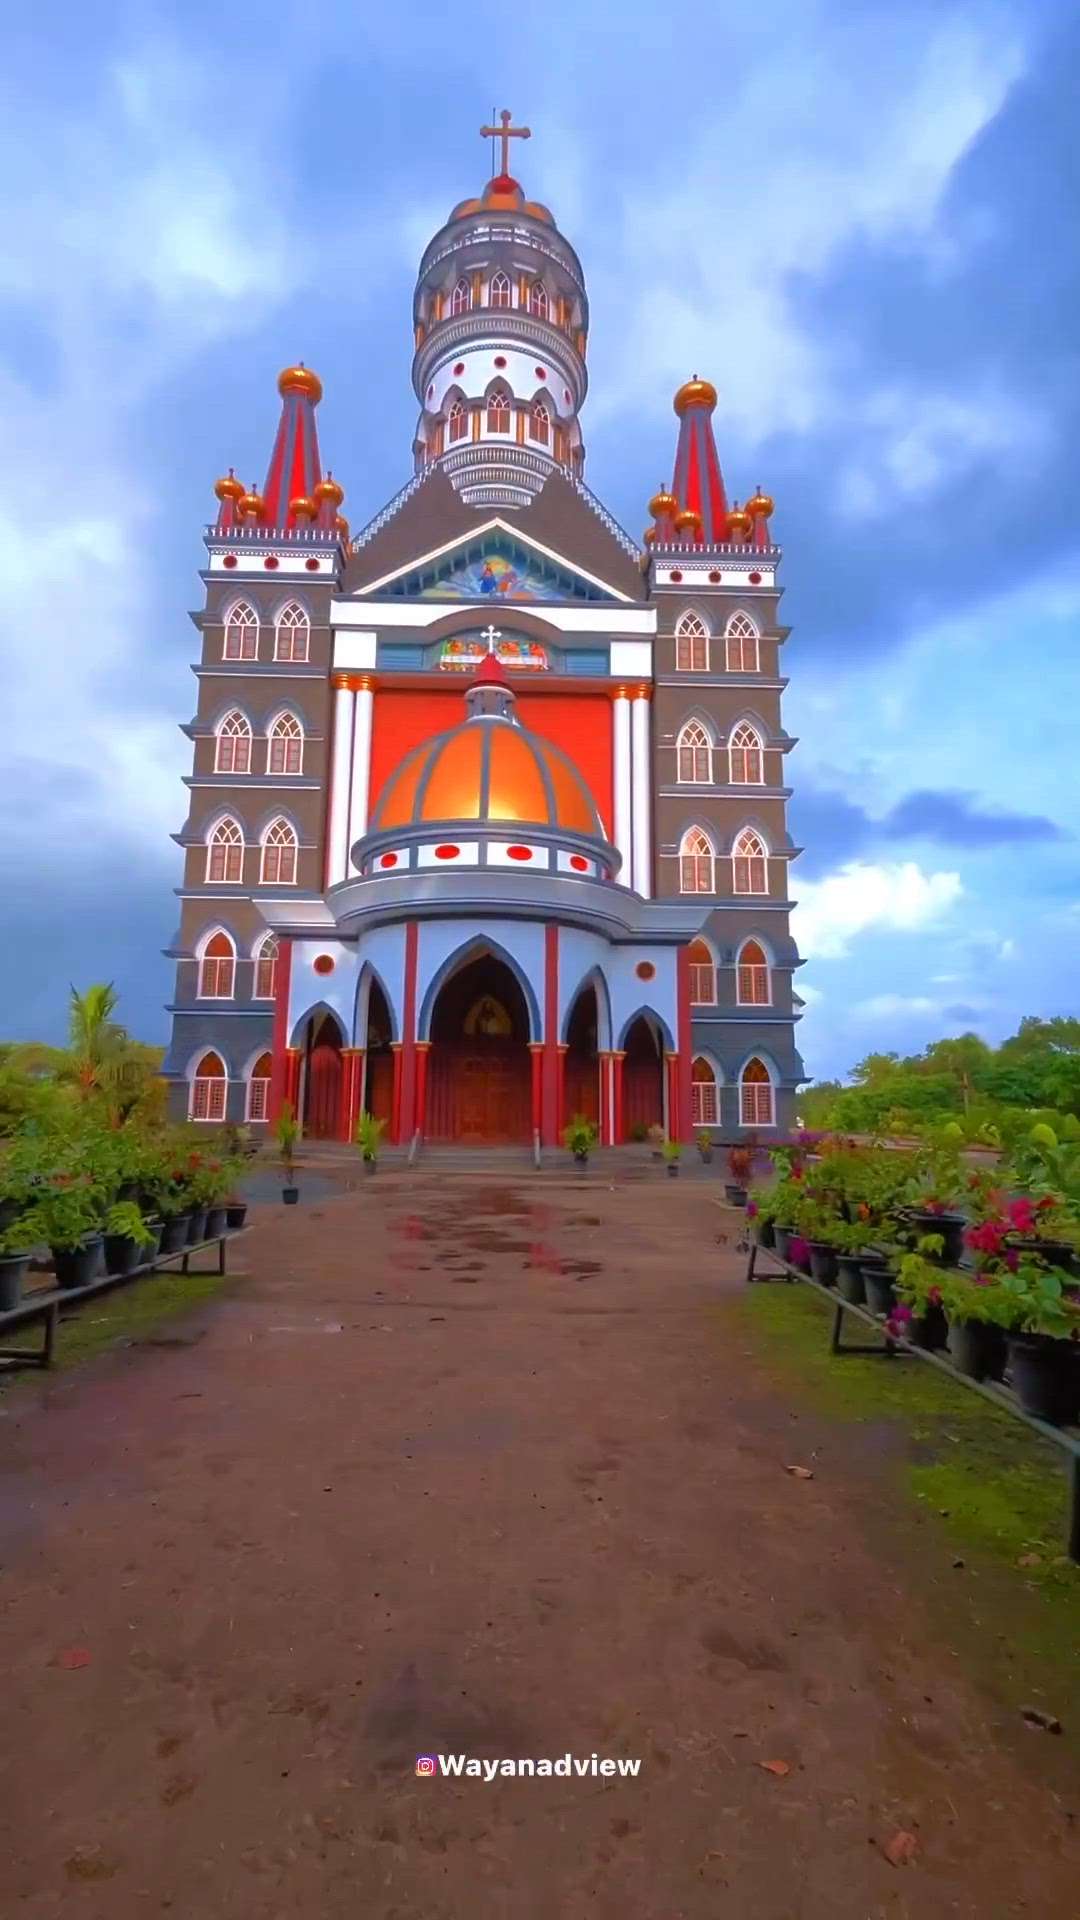 second biggest church in india
sulthan bathery